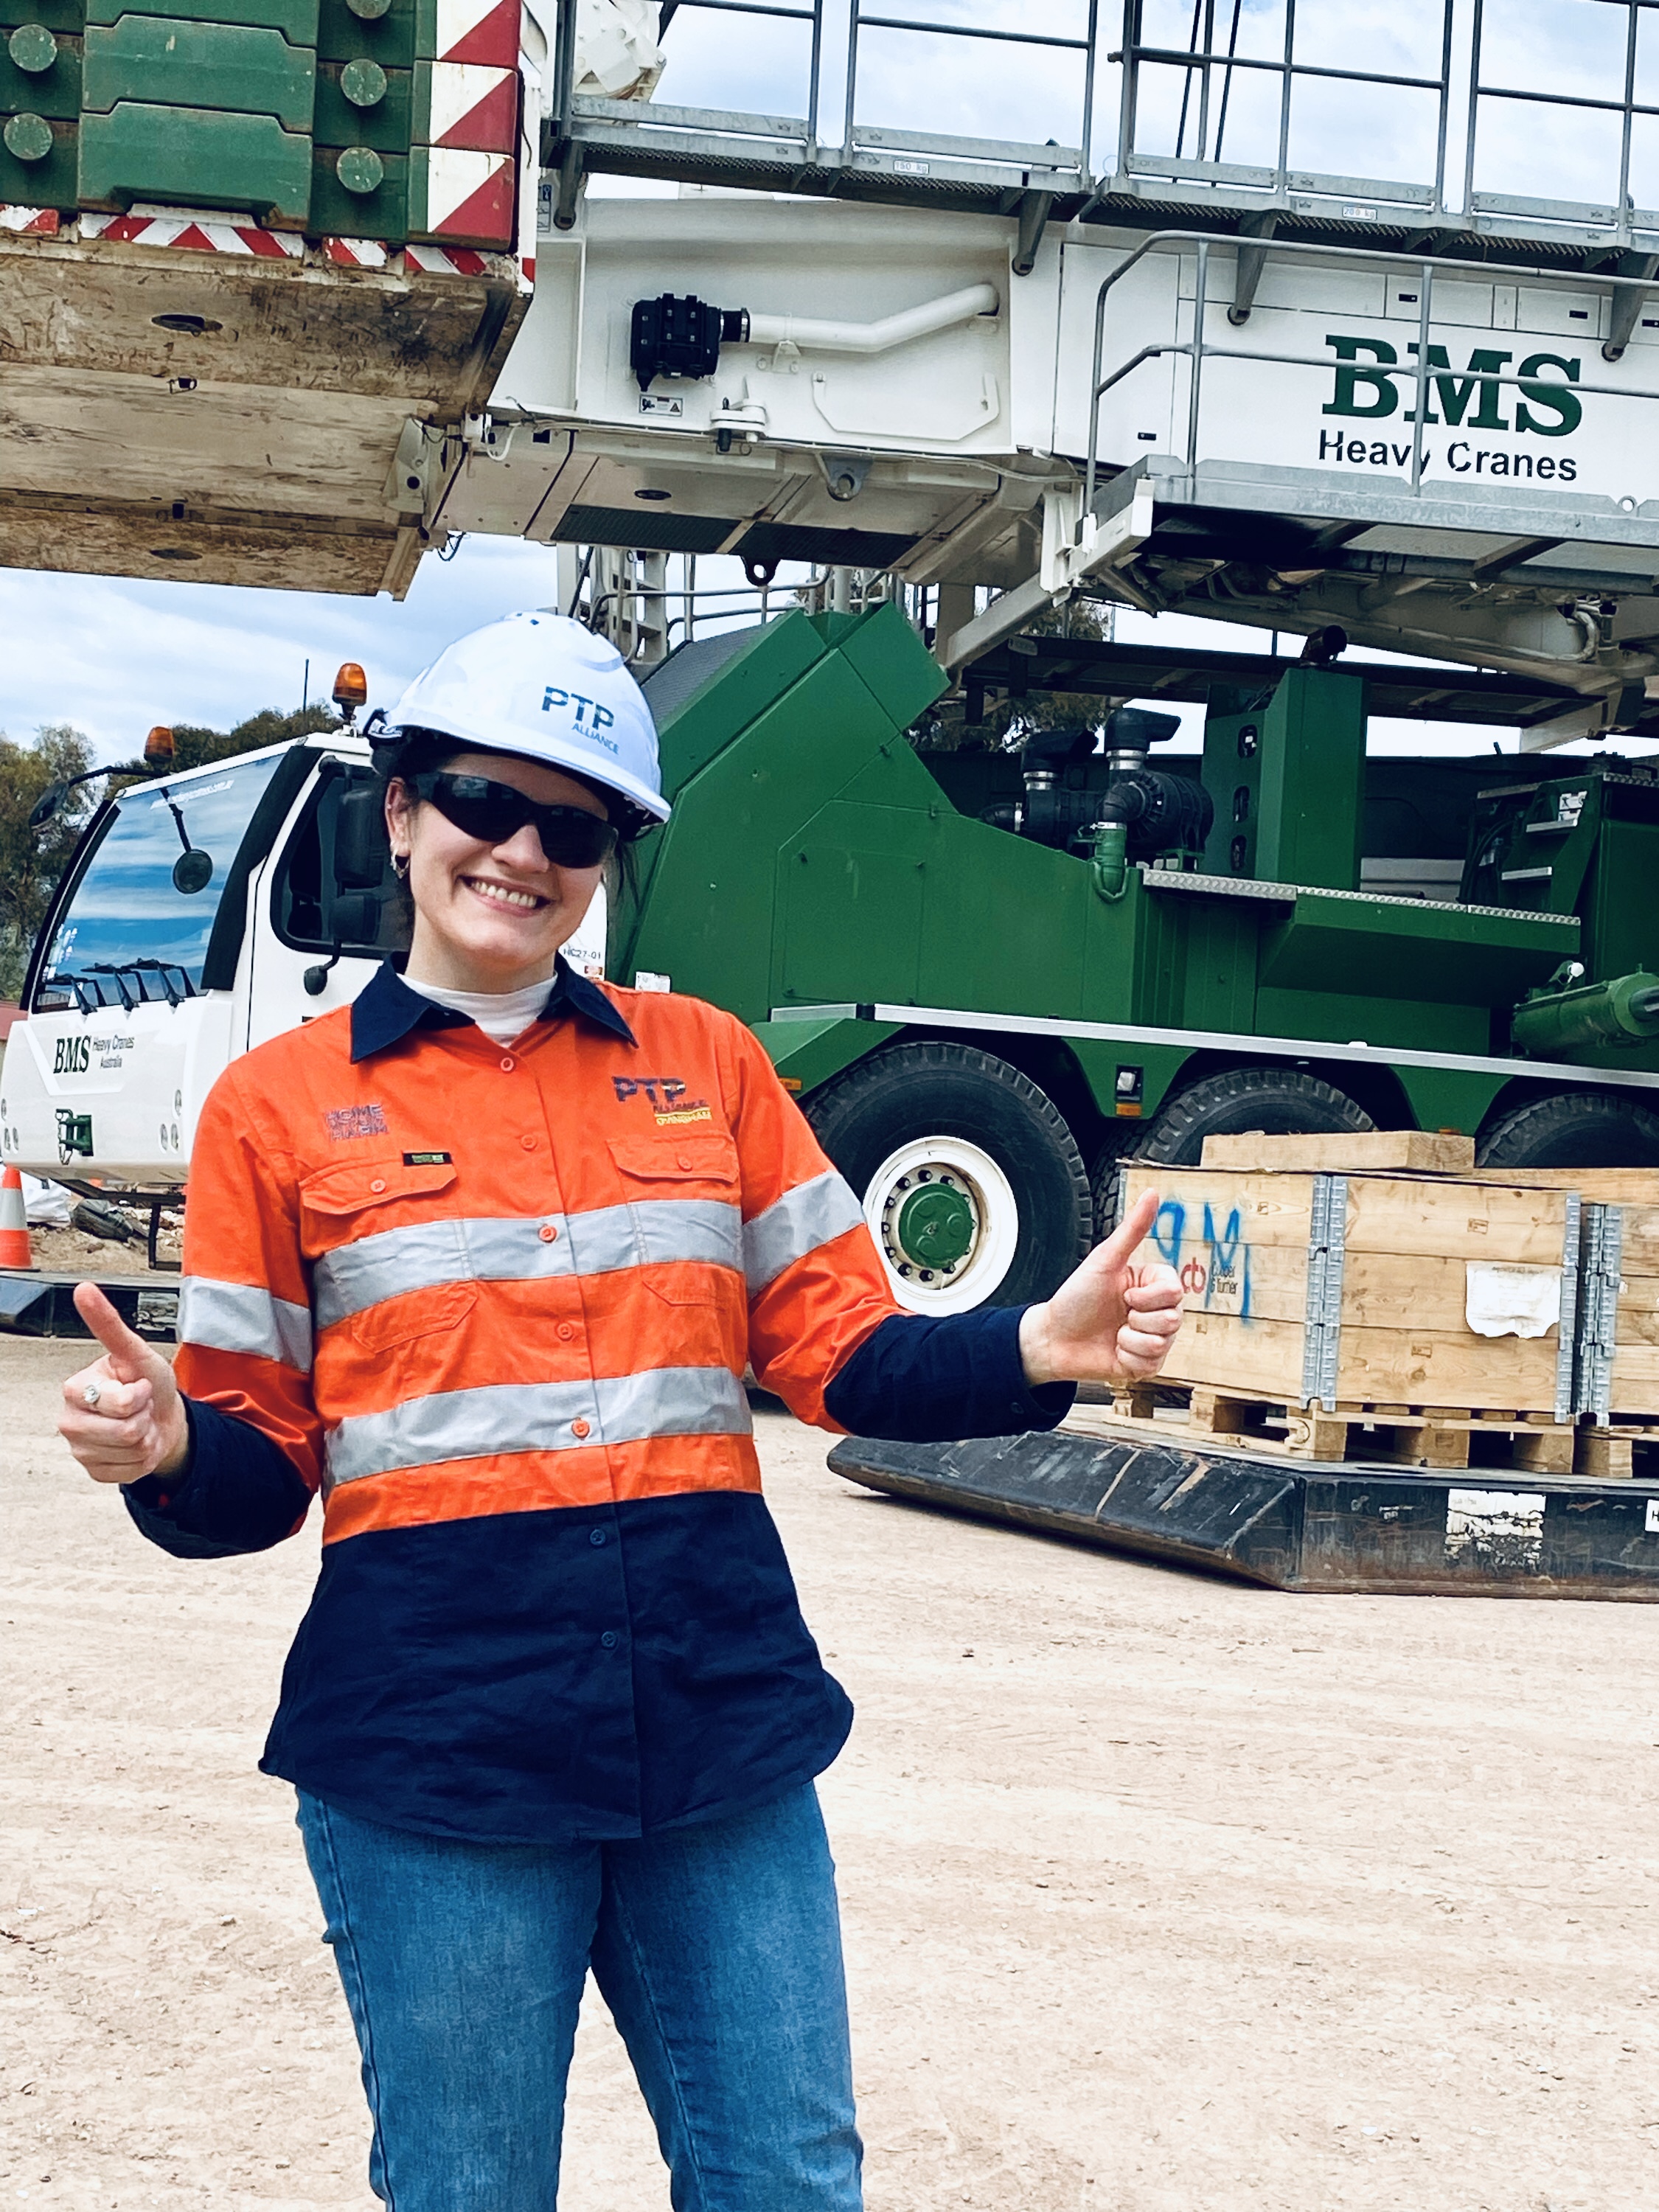 Teodara is wearing a white helmet and orange high vis long sleeved shirt. She is standing behind work site with a truck. She is smiling and is posing with two thumbs up